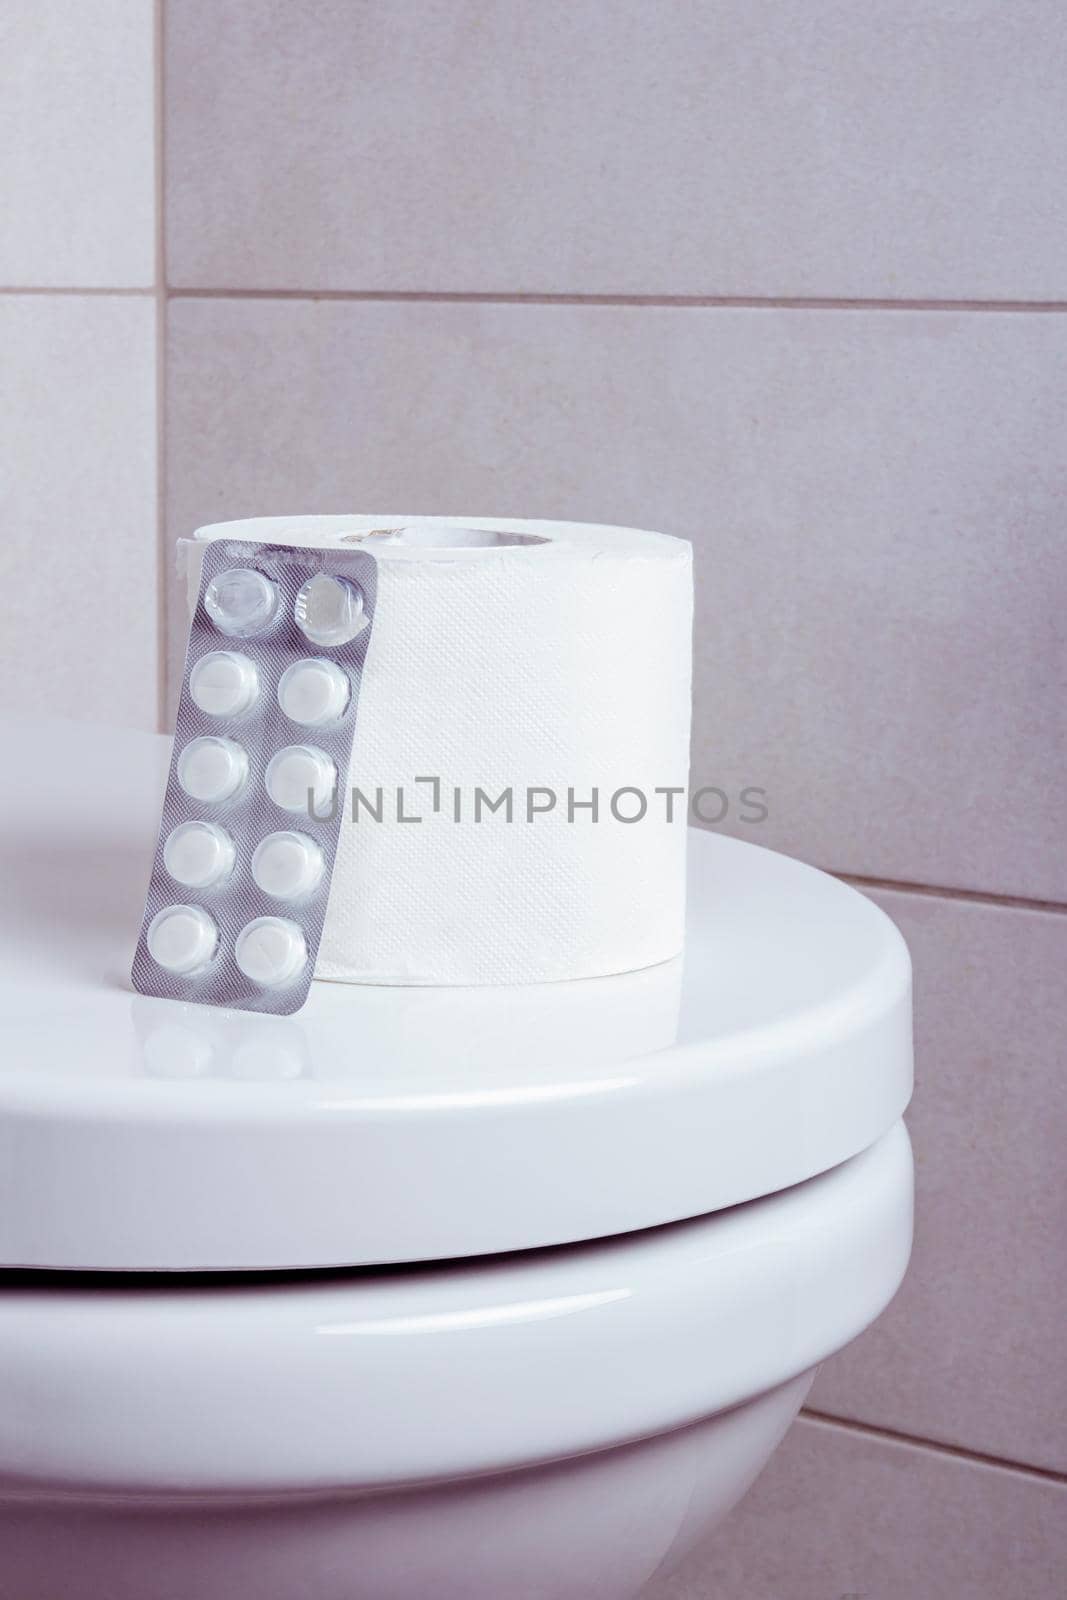 a roll of toilet paper with white pills on the toilet. by bySergPo